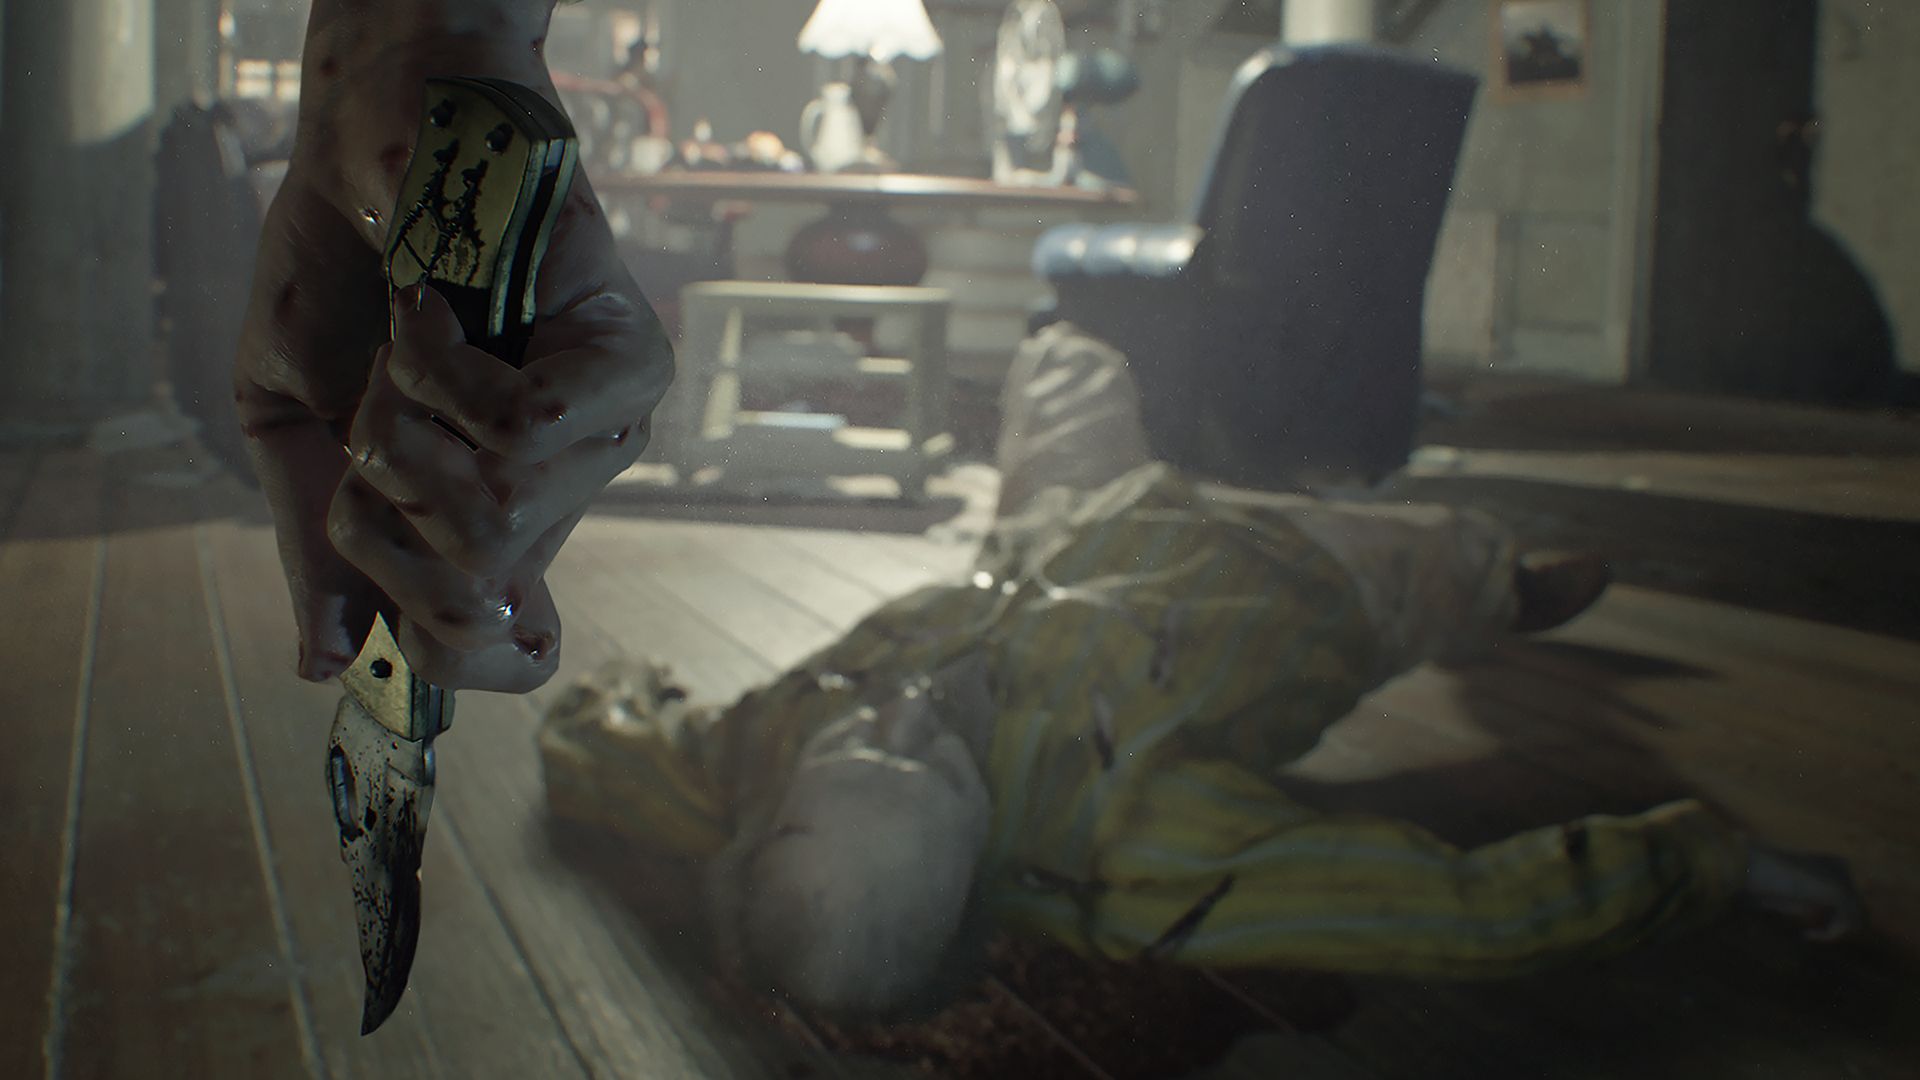 Resident Evil 7 Biohazard Available Now On Pc Includes Hbao And Other Enhancements